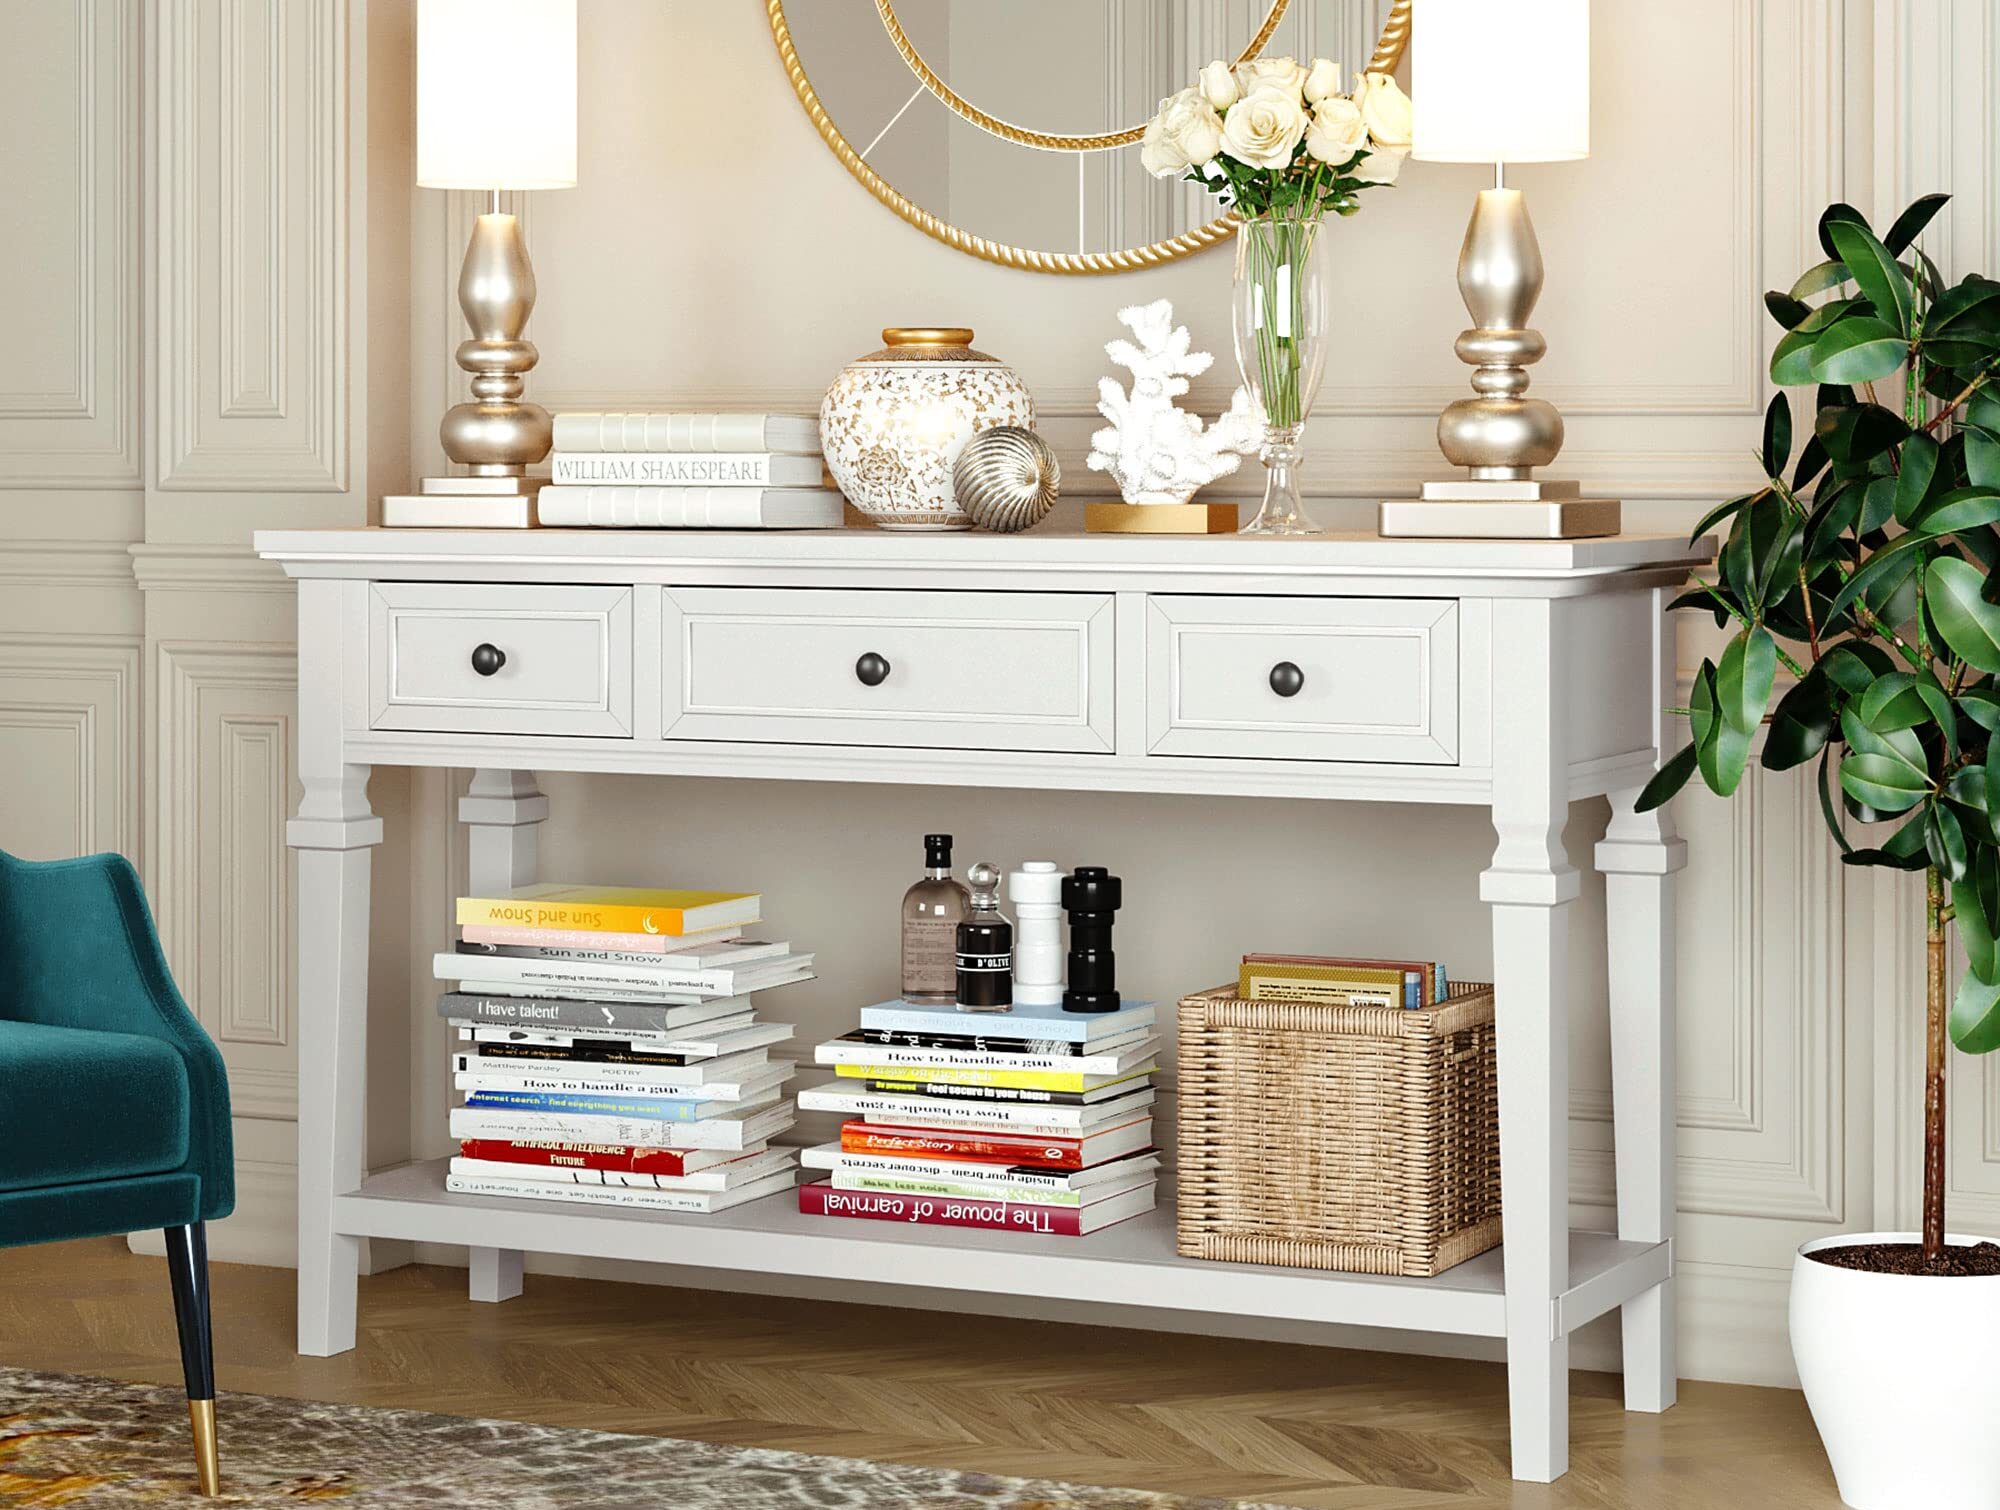 Console Tables with Baskets Toy storage ideas